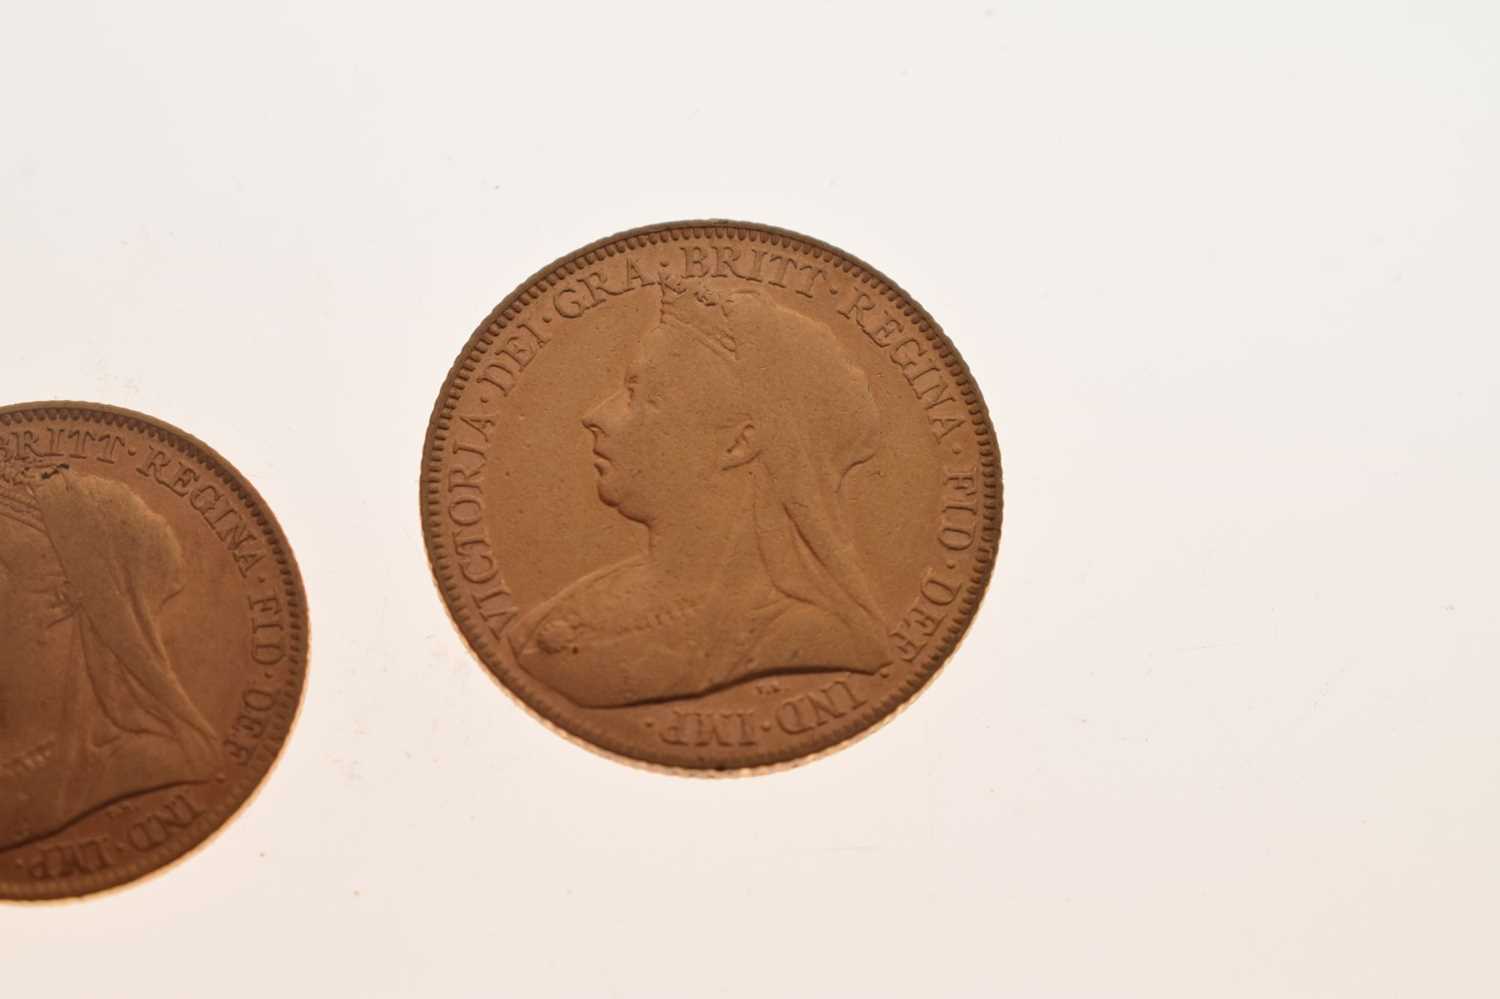 Queen Victoria gold sovereign, 1900, and a gold half sovereign, 1848 - Image 5 of 7